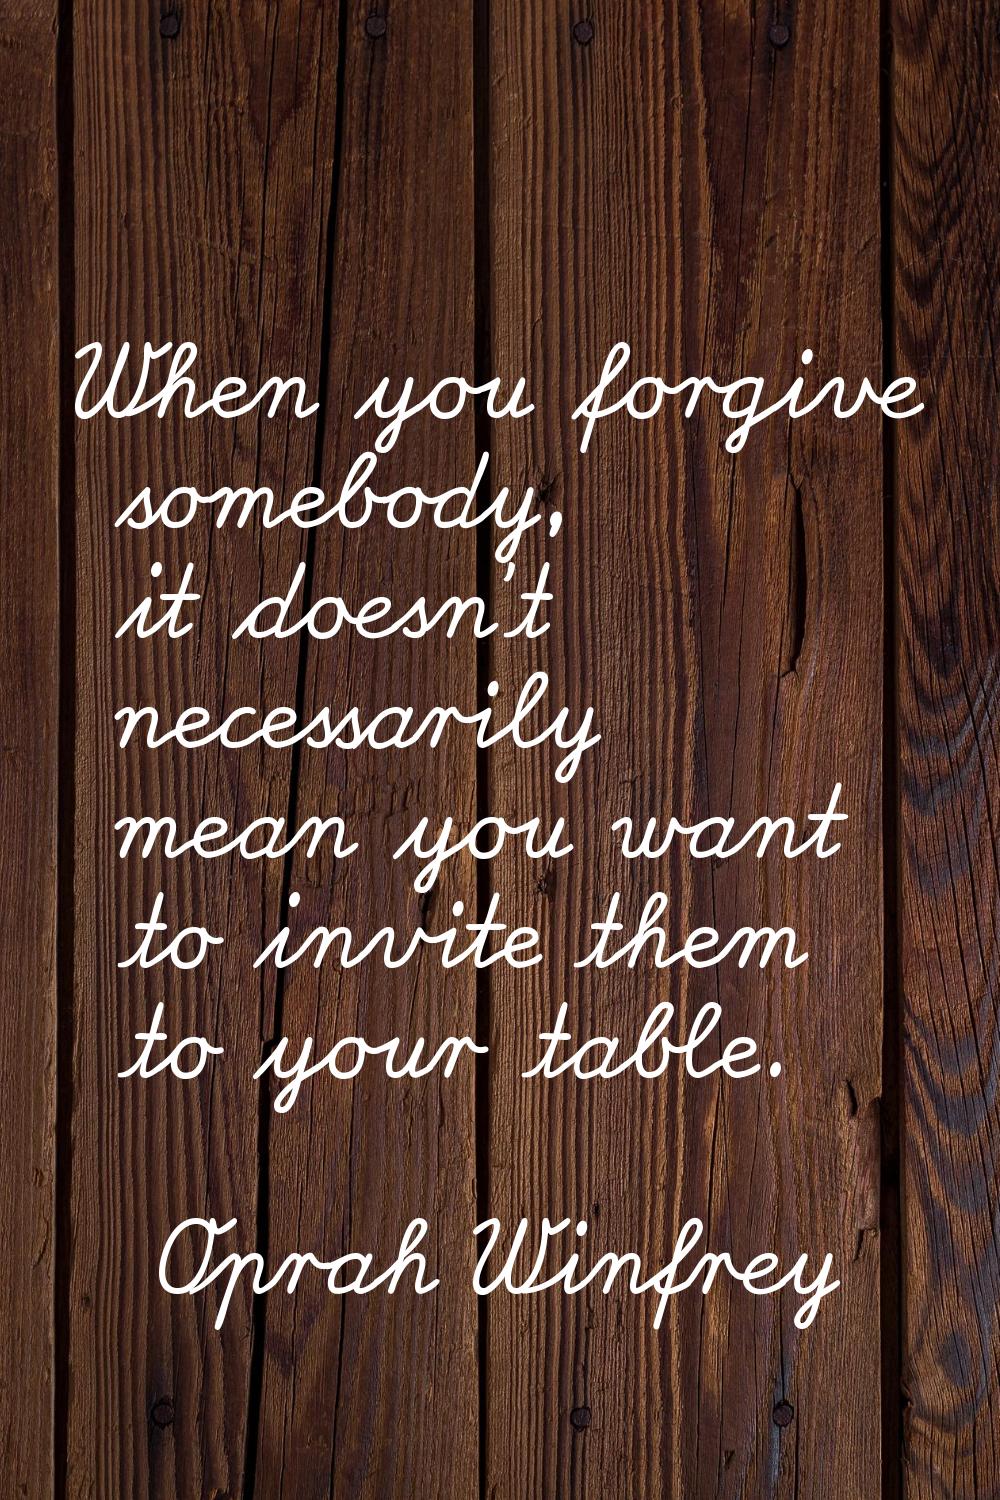 When you forgive somebody, it doesn't necessarily mean you want to invite them to your table.